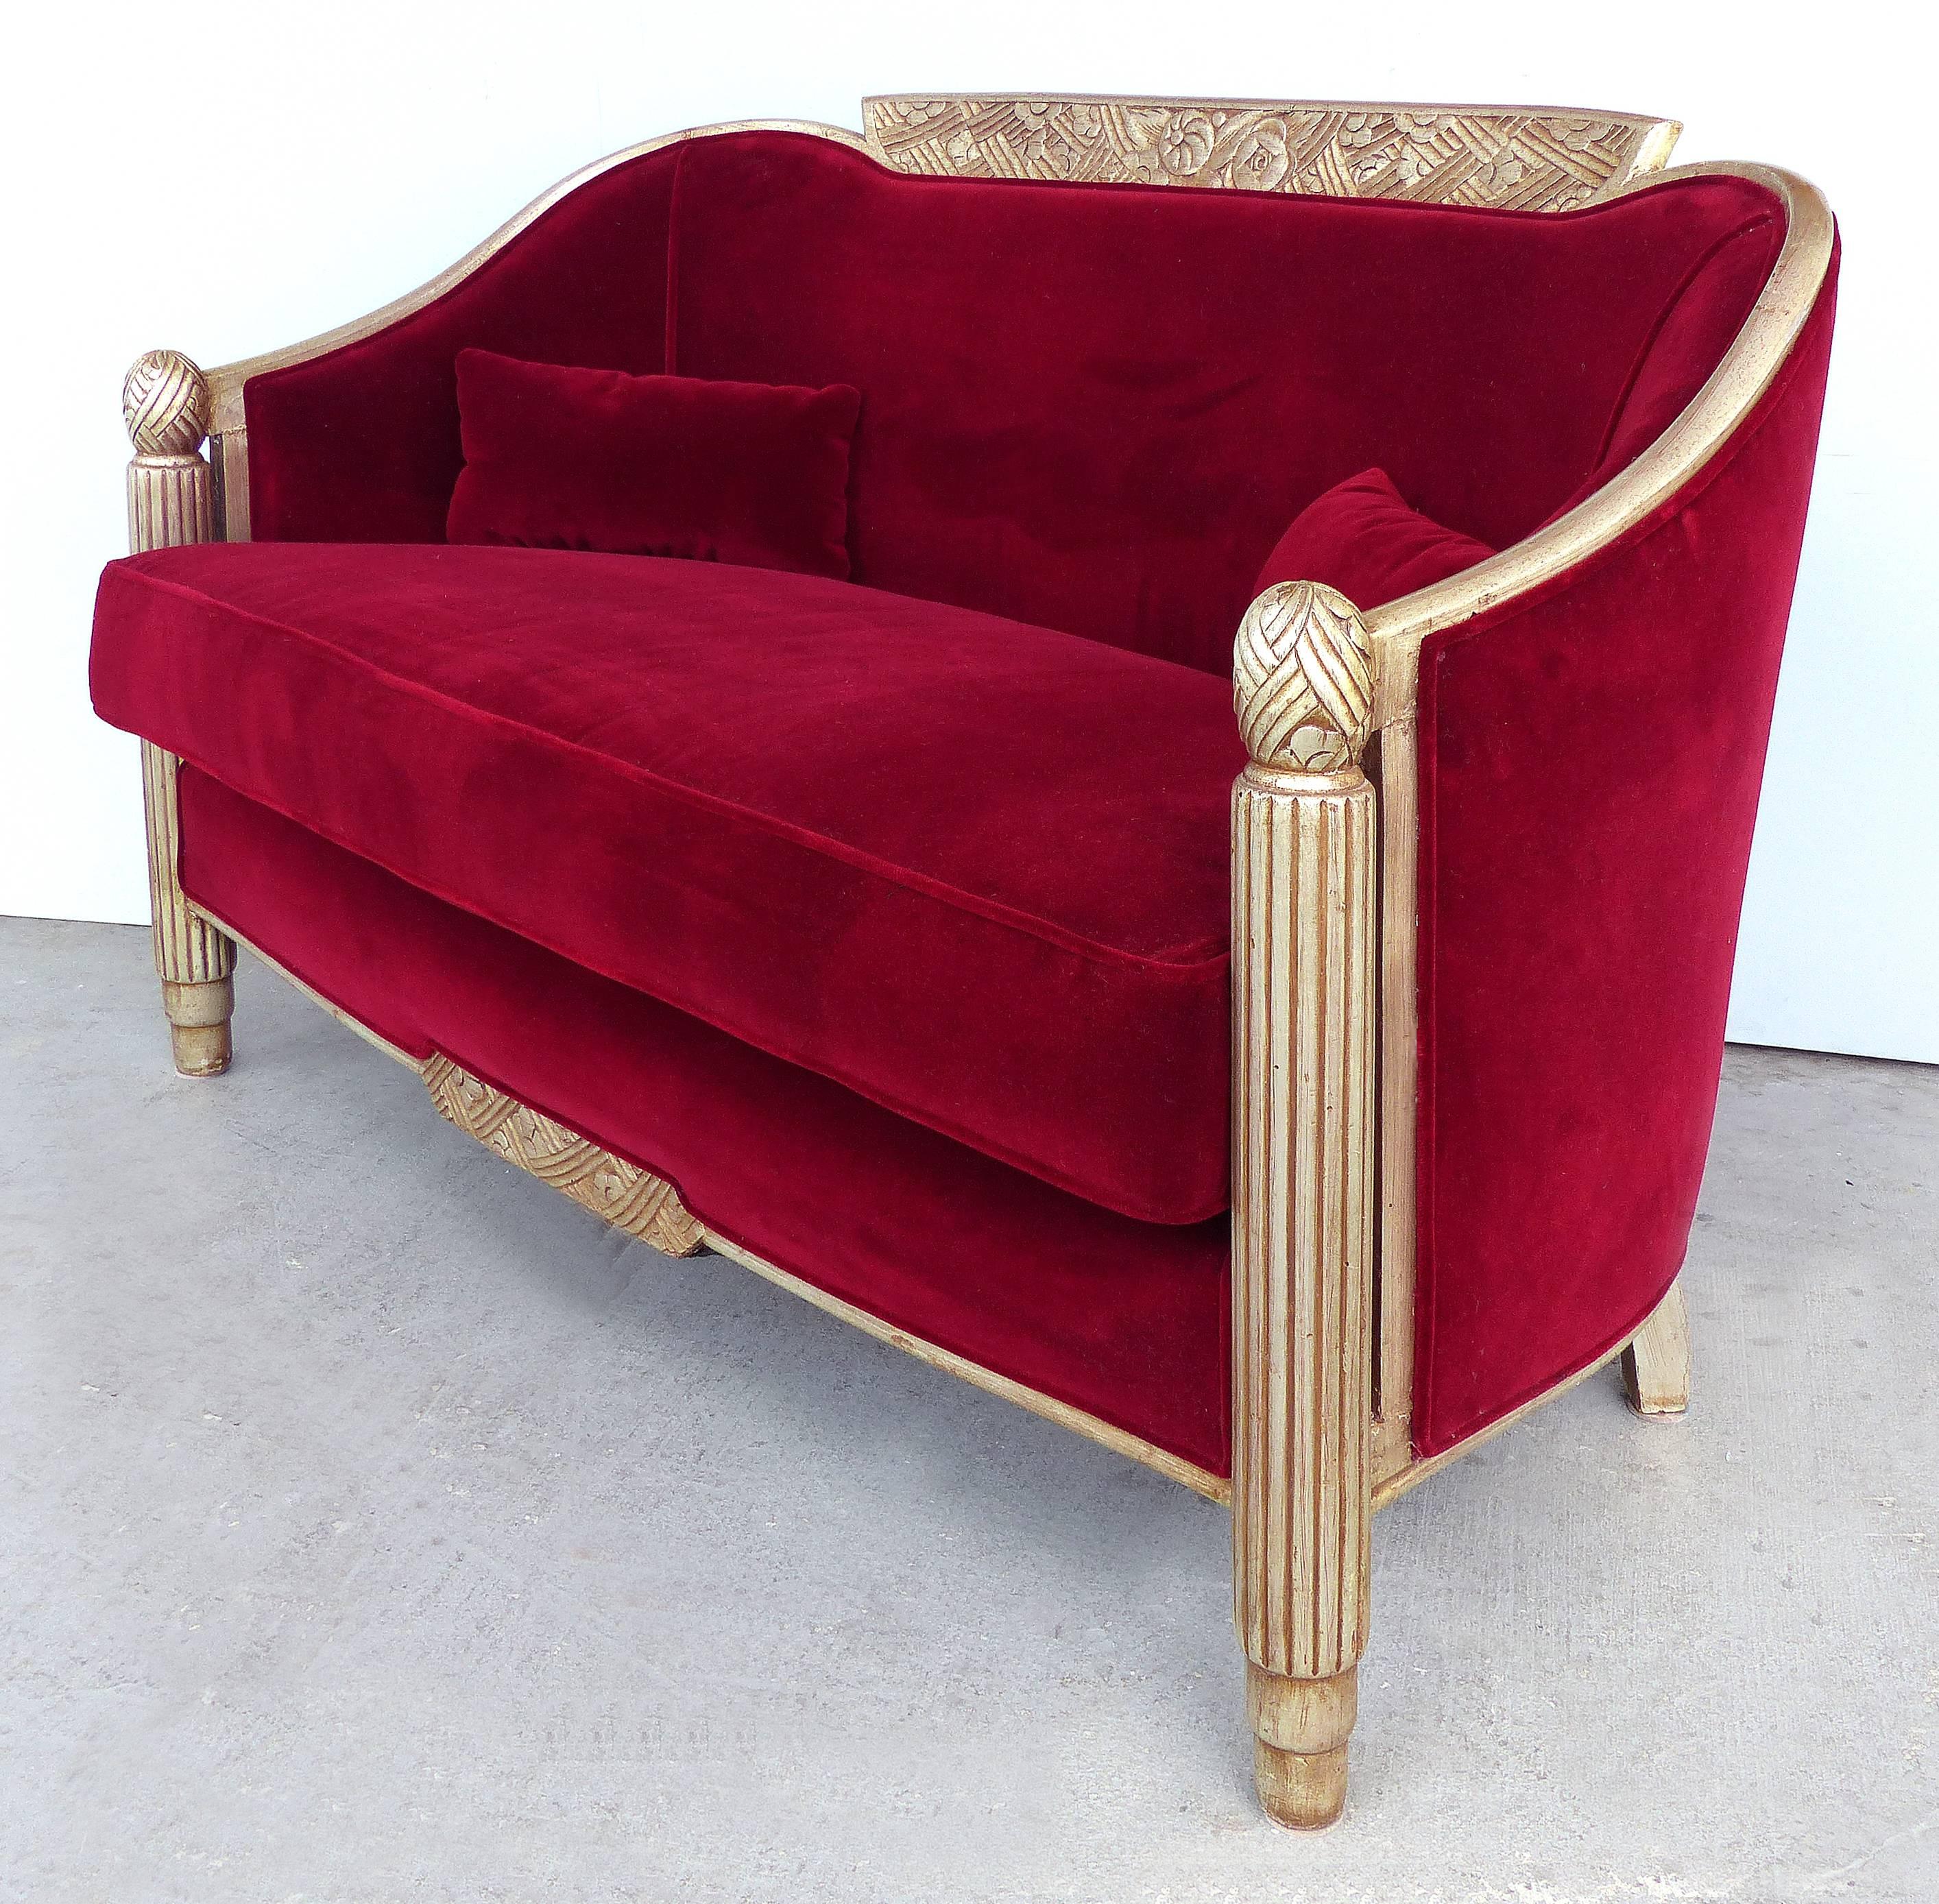 Paul Follot French Art Deco Settee and Bergères Set

Offered for sale are a French giltwood Art Deco settee and pair of bergeres by Paul Follot (1877-1941). The set has been upholstered in a deep burgundy mohair velvet fabric which remains in Fine